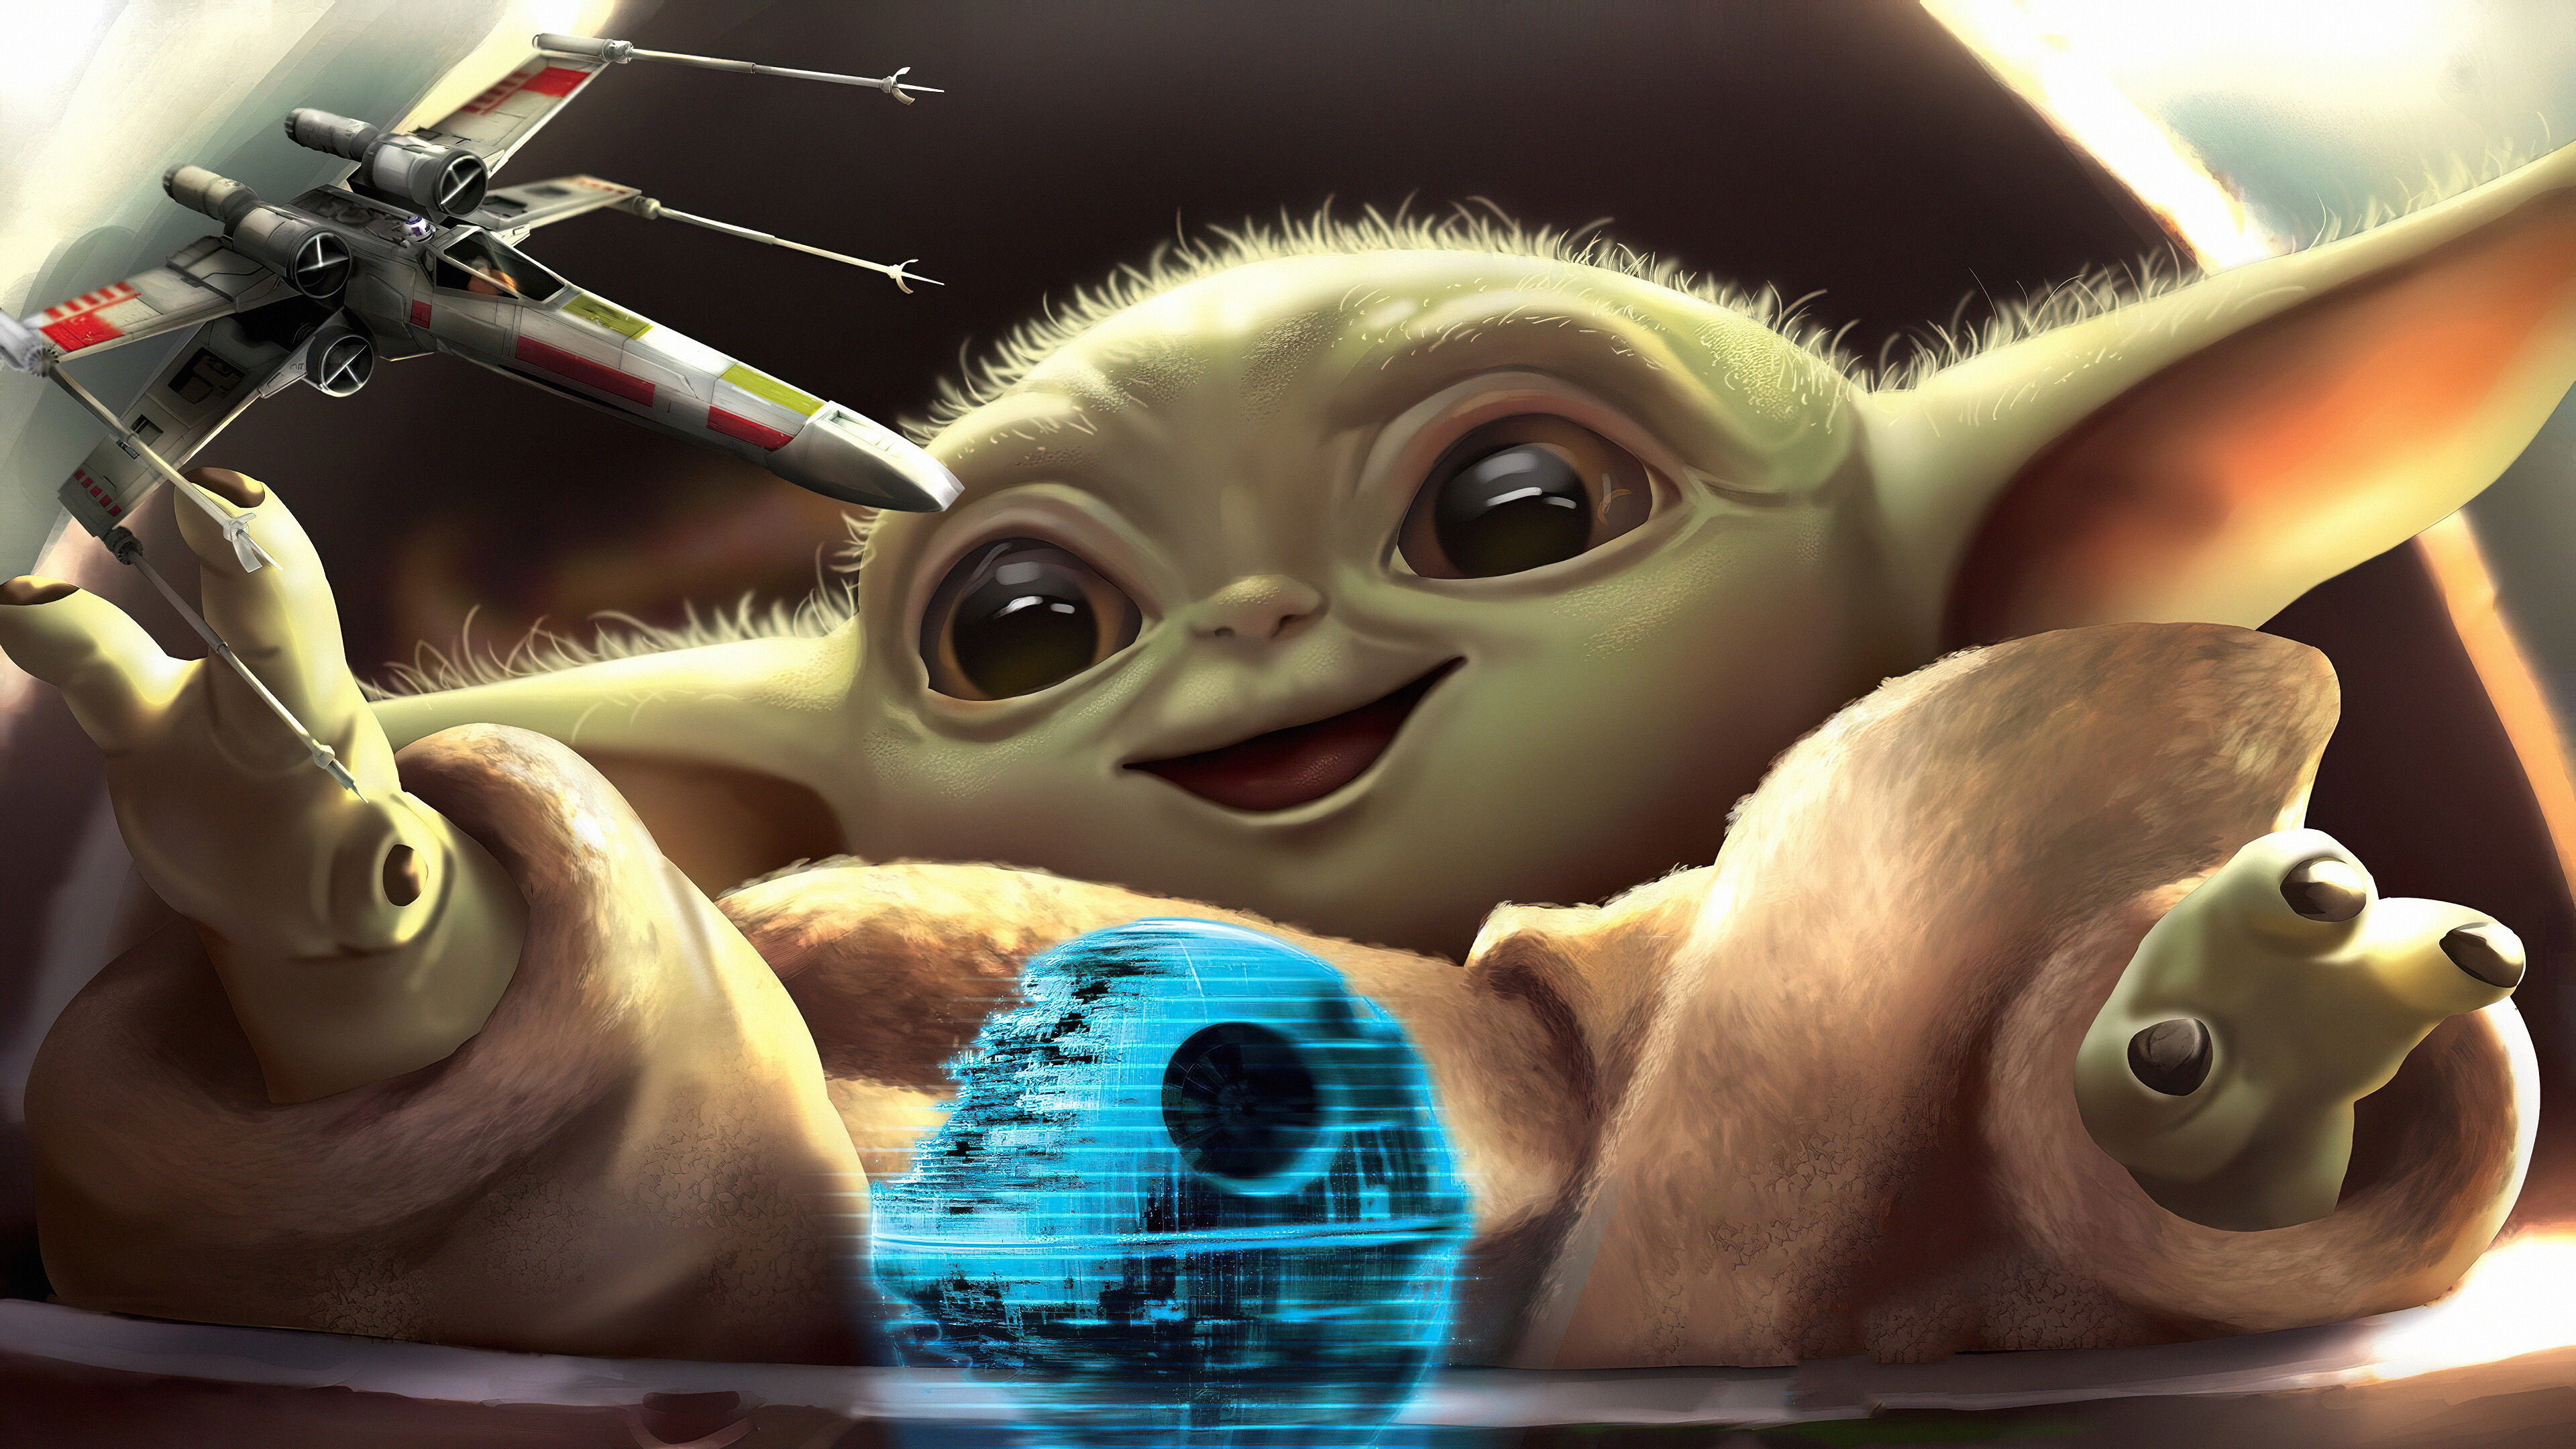 Free Download Star Wars Baby Yoda Hd Wallpaper Backgrounds Download 3840x2160 For Your Desktop Mobile Tablet Explore 32 Baby Yoda Hd Wallpapers Baby Yoda Valentine Wallpapers Yoda Wallpaper